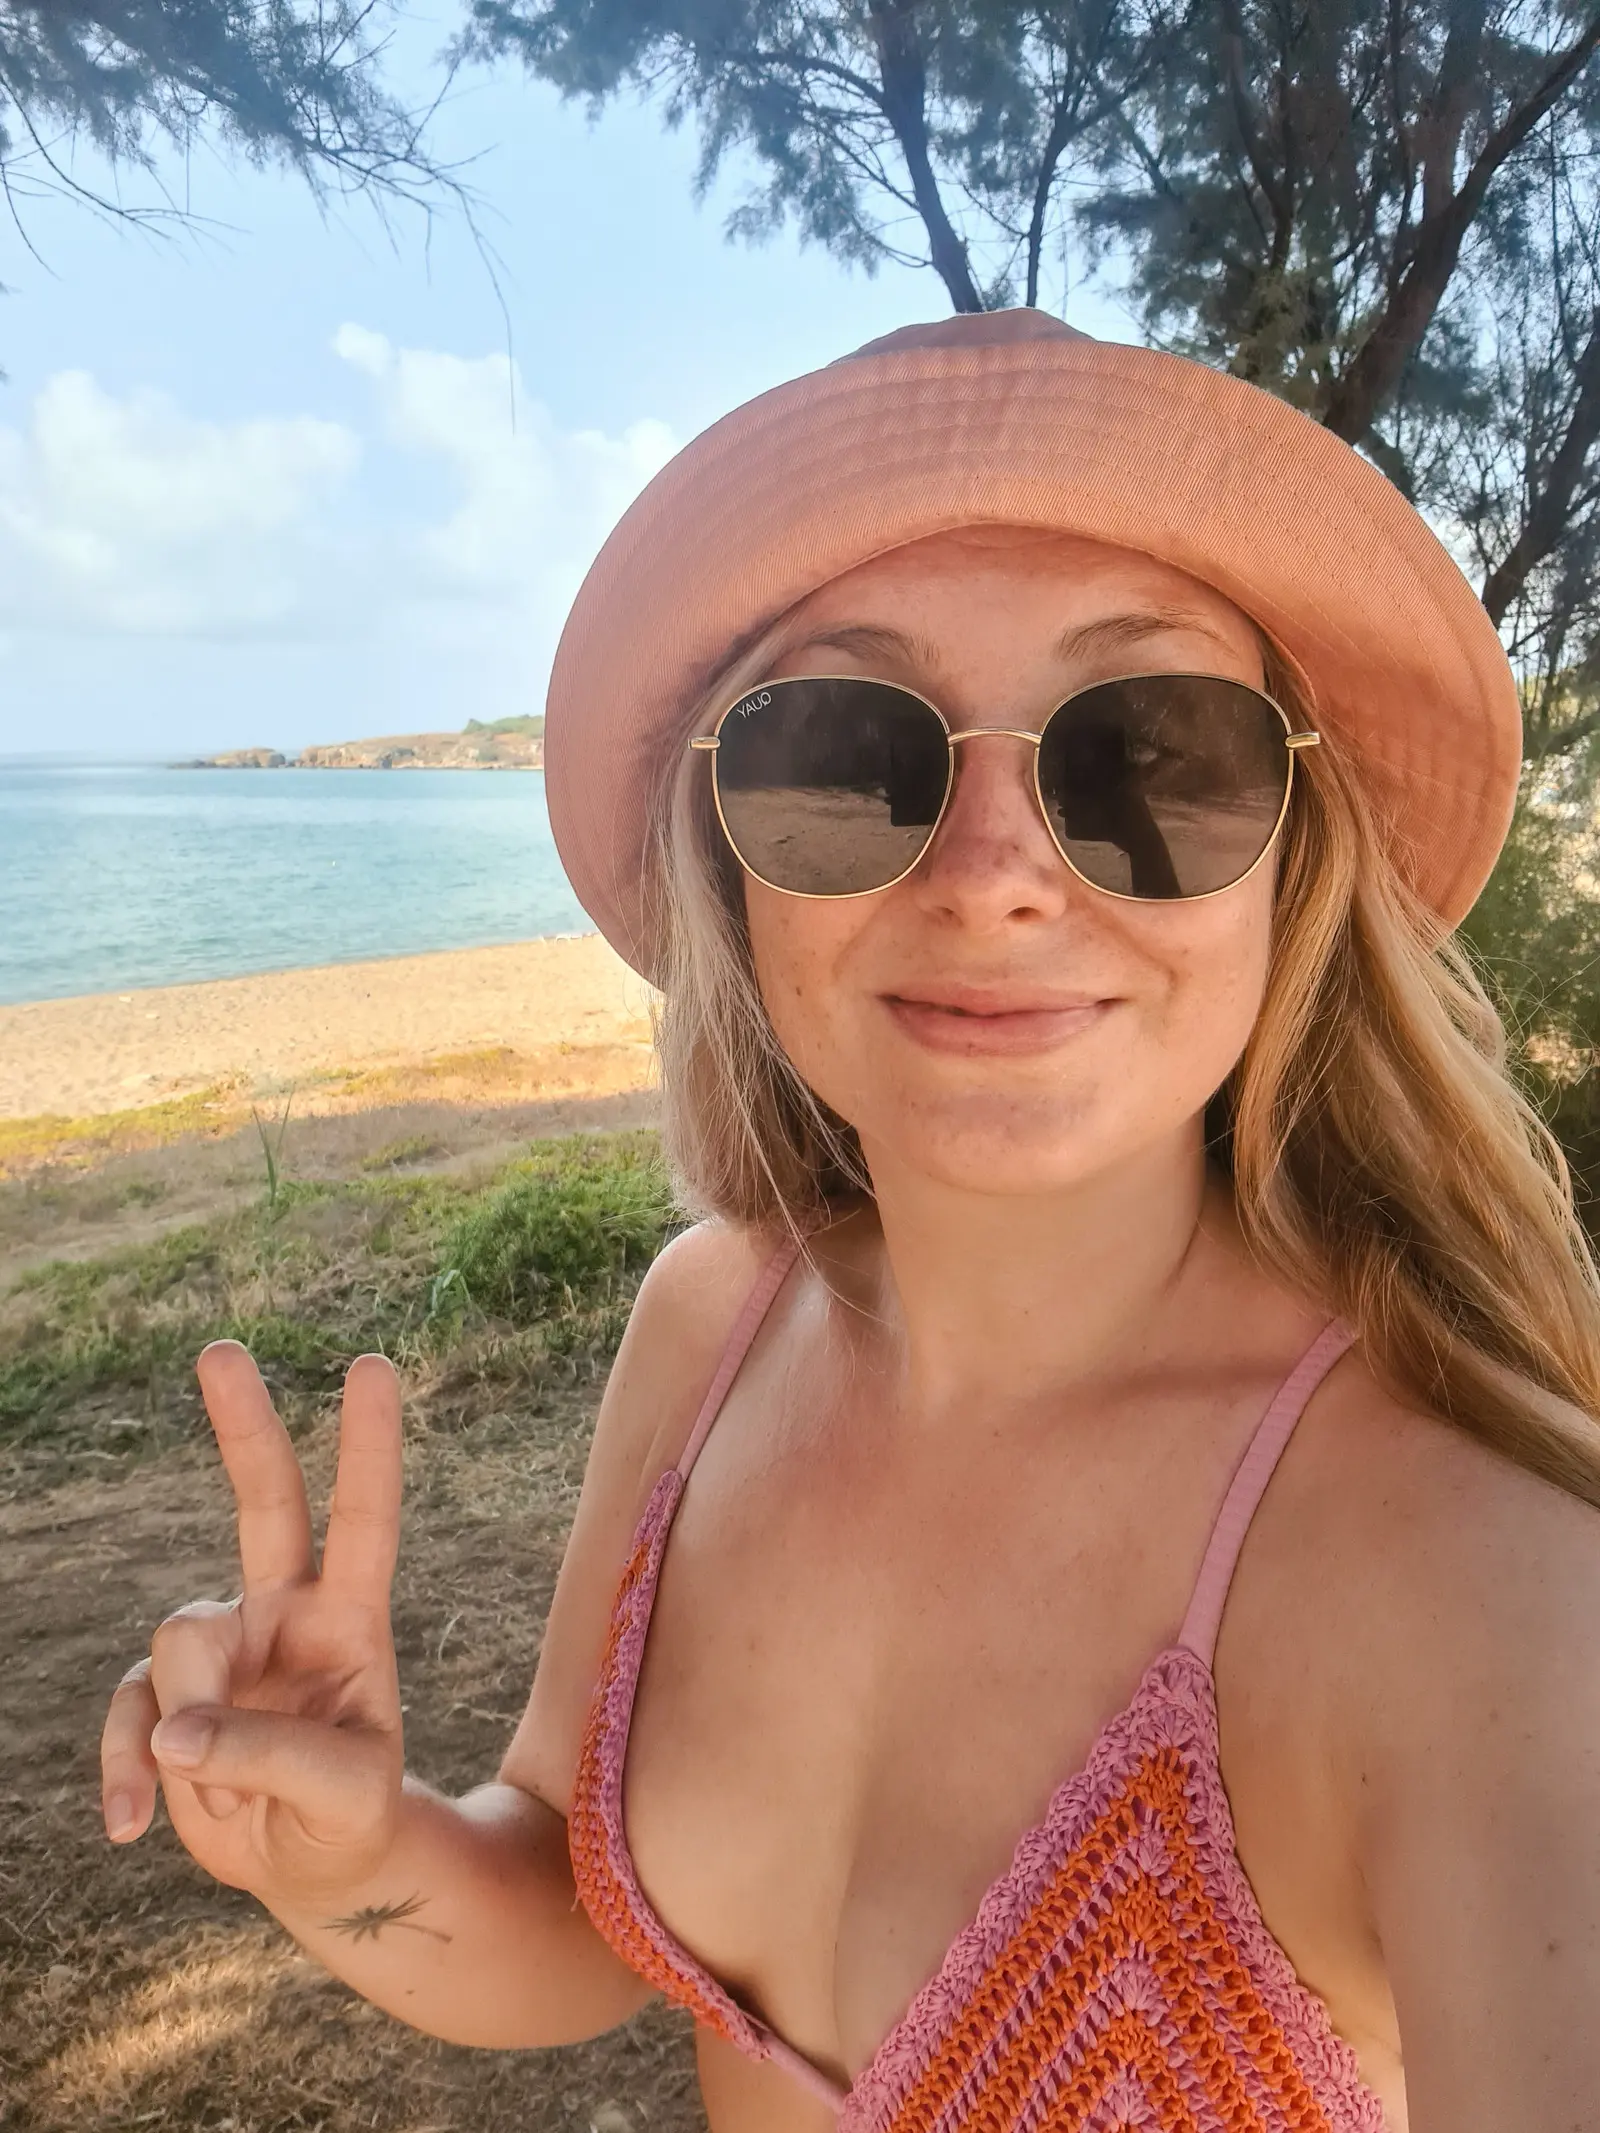 Girl in a orange bucket hat, large round sunglasses and purple bikini top making a peace sign in front of Chrissi Akti Beach, one of the best beaches in Chania Crete.